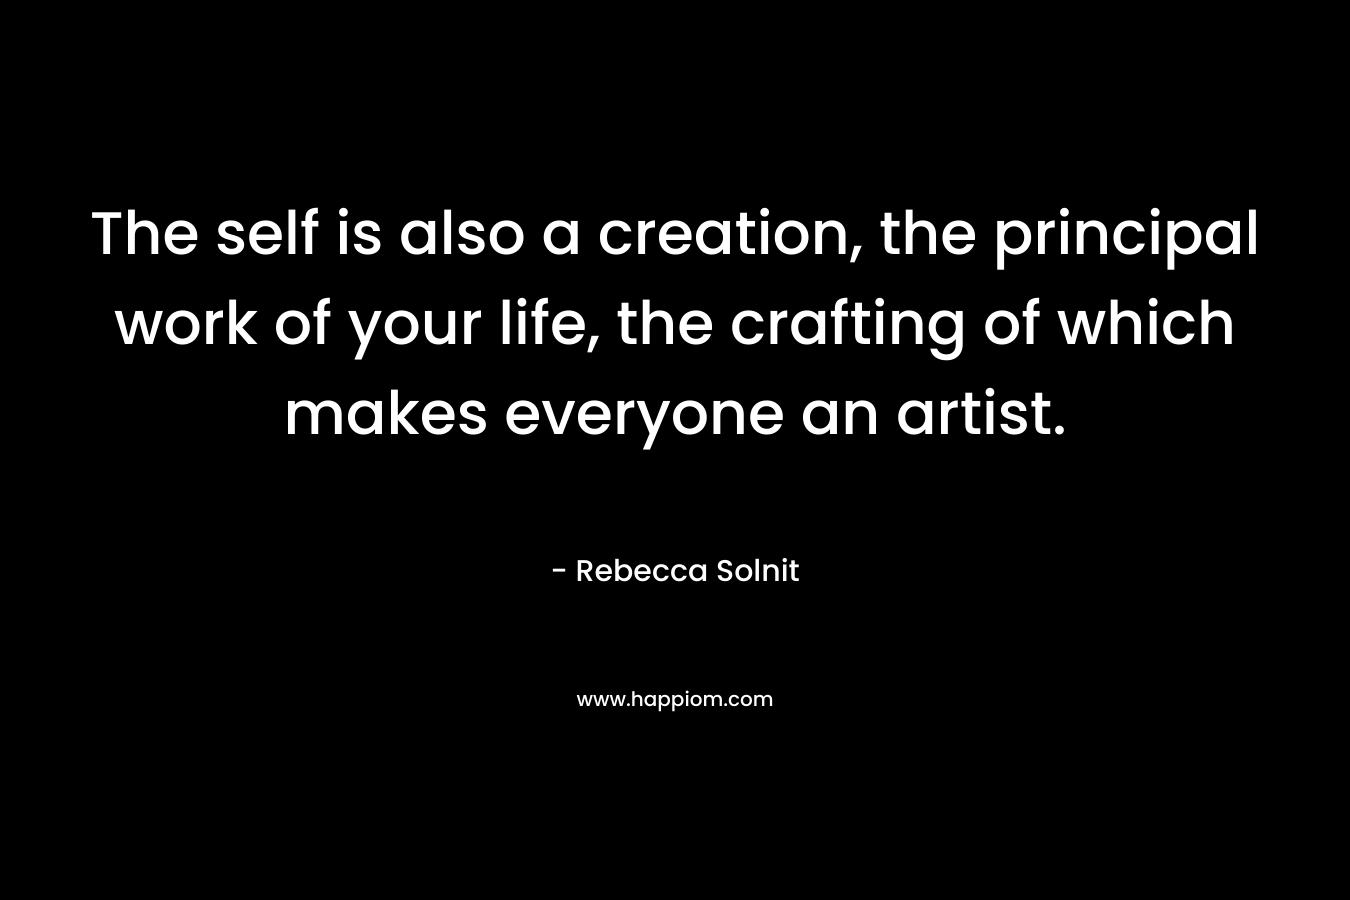 The self is also a creation, the principal work of your life, the crafting of which makes everyone an artist.